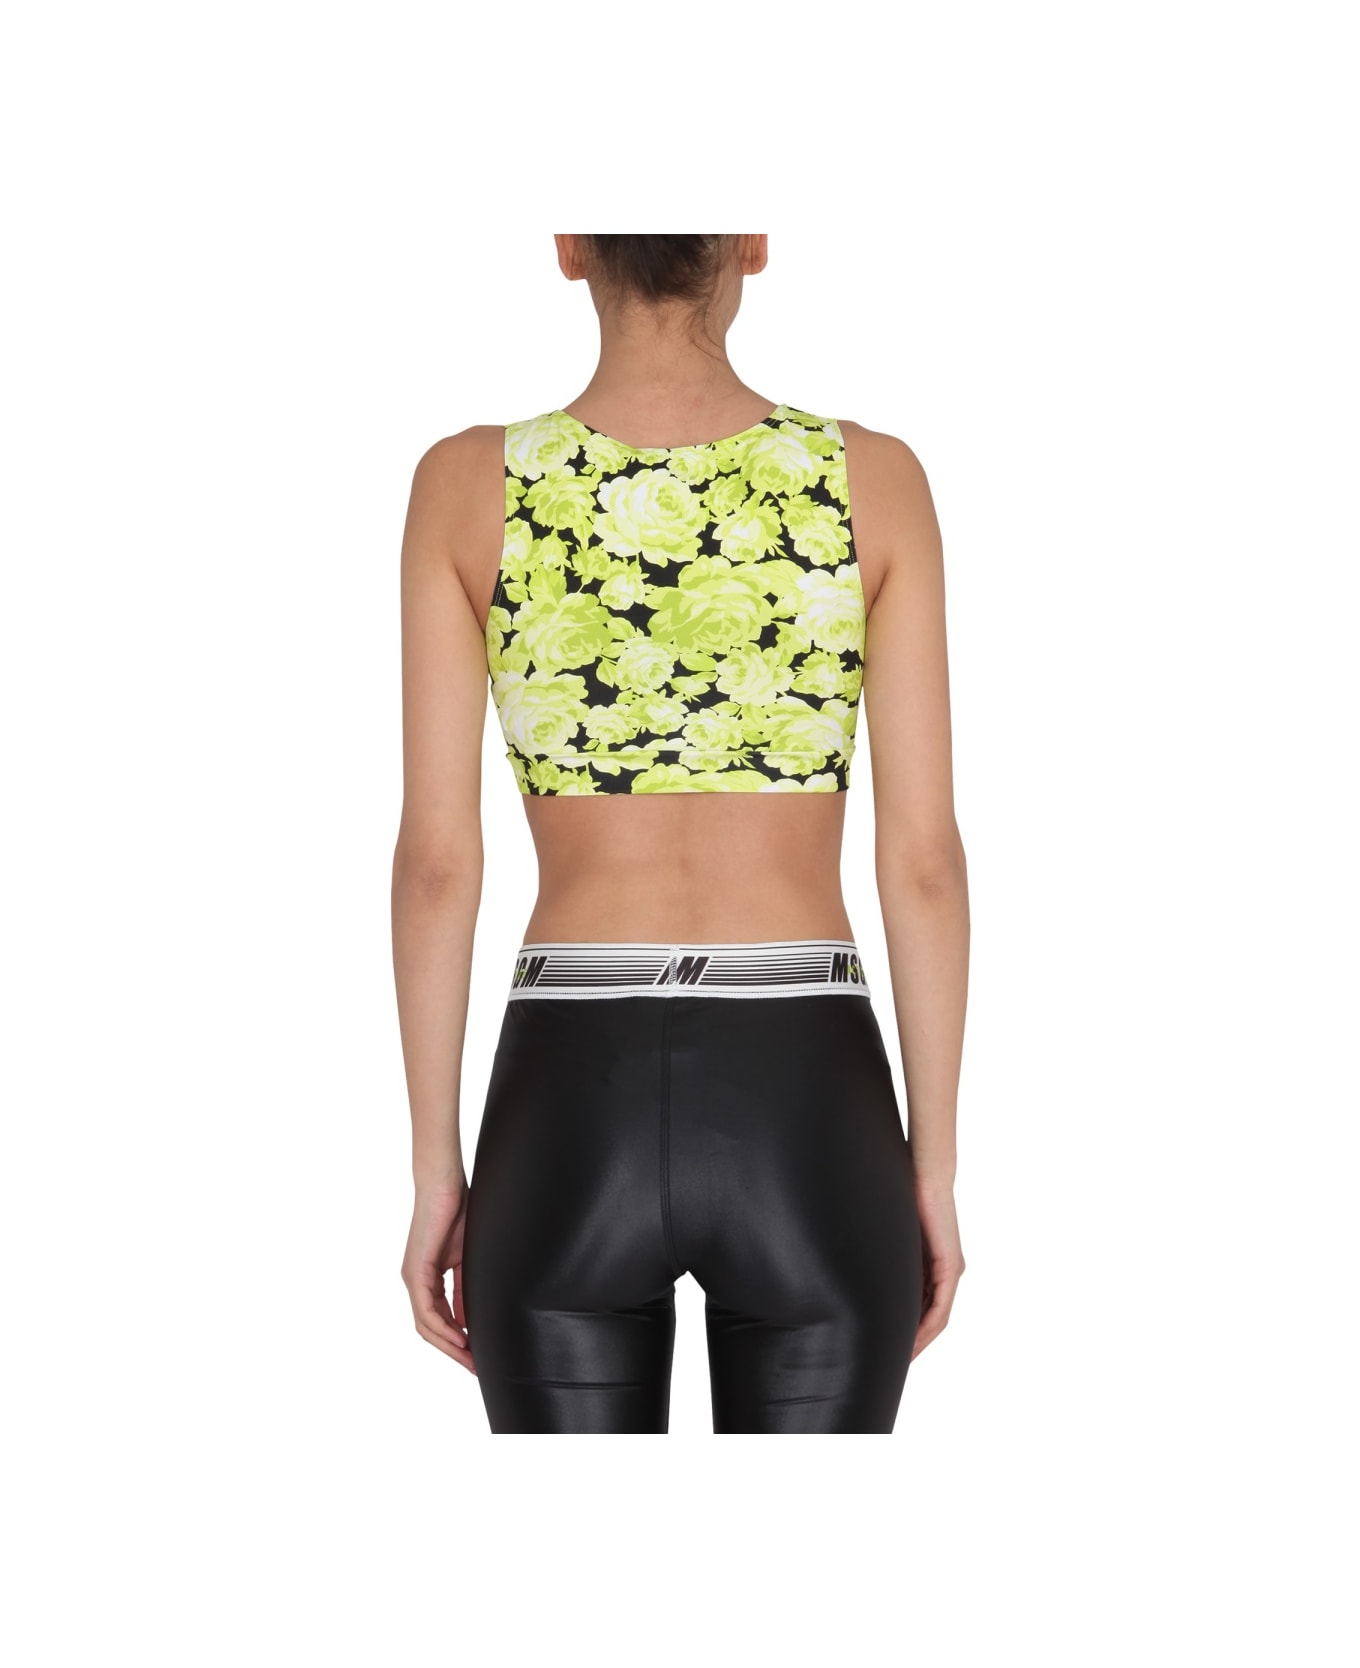 MSGM Floral Print Cropped Top - YELLOW